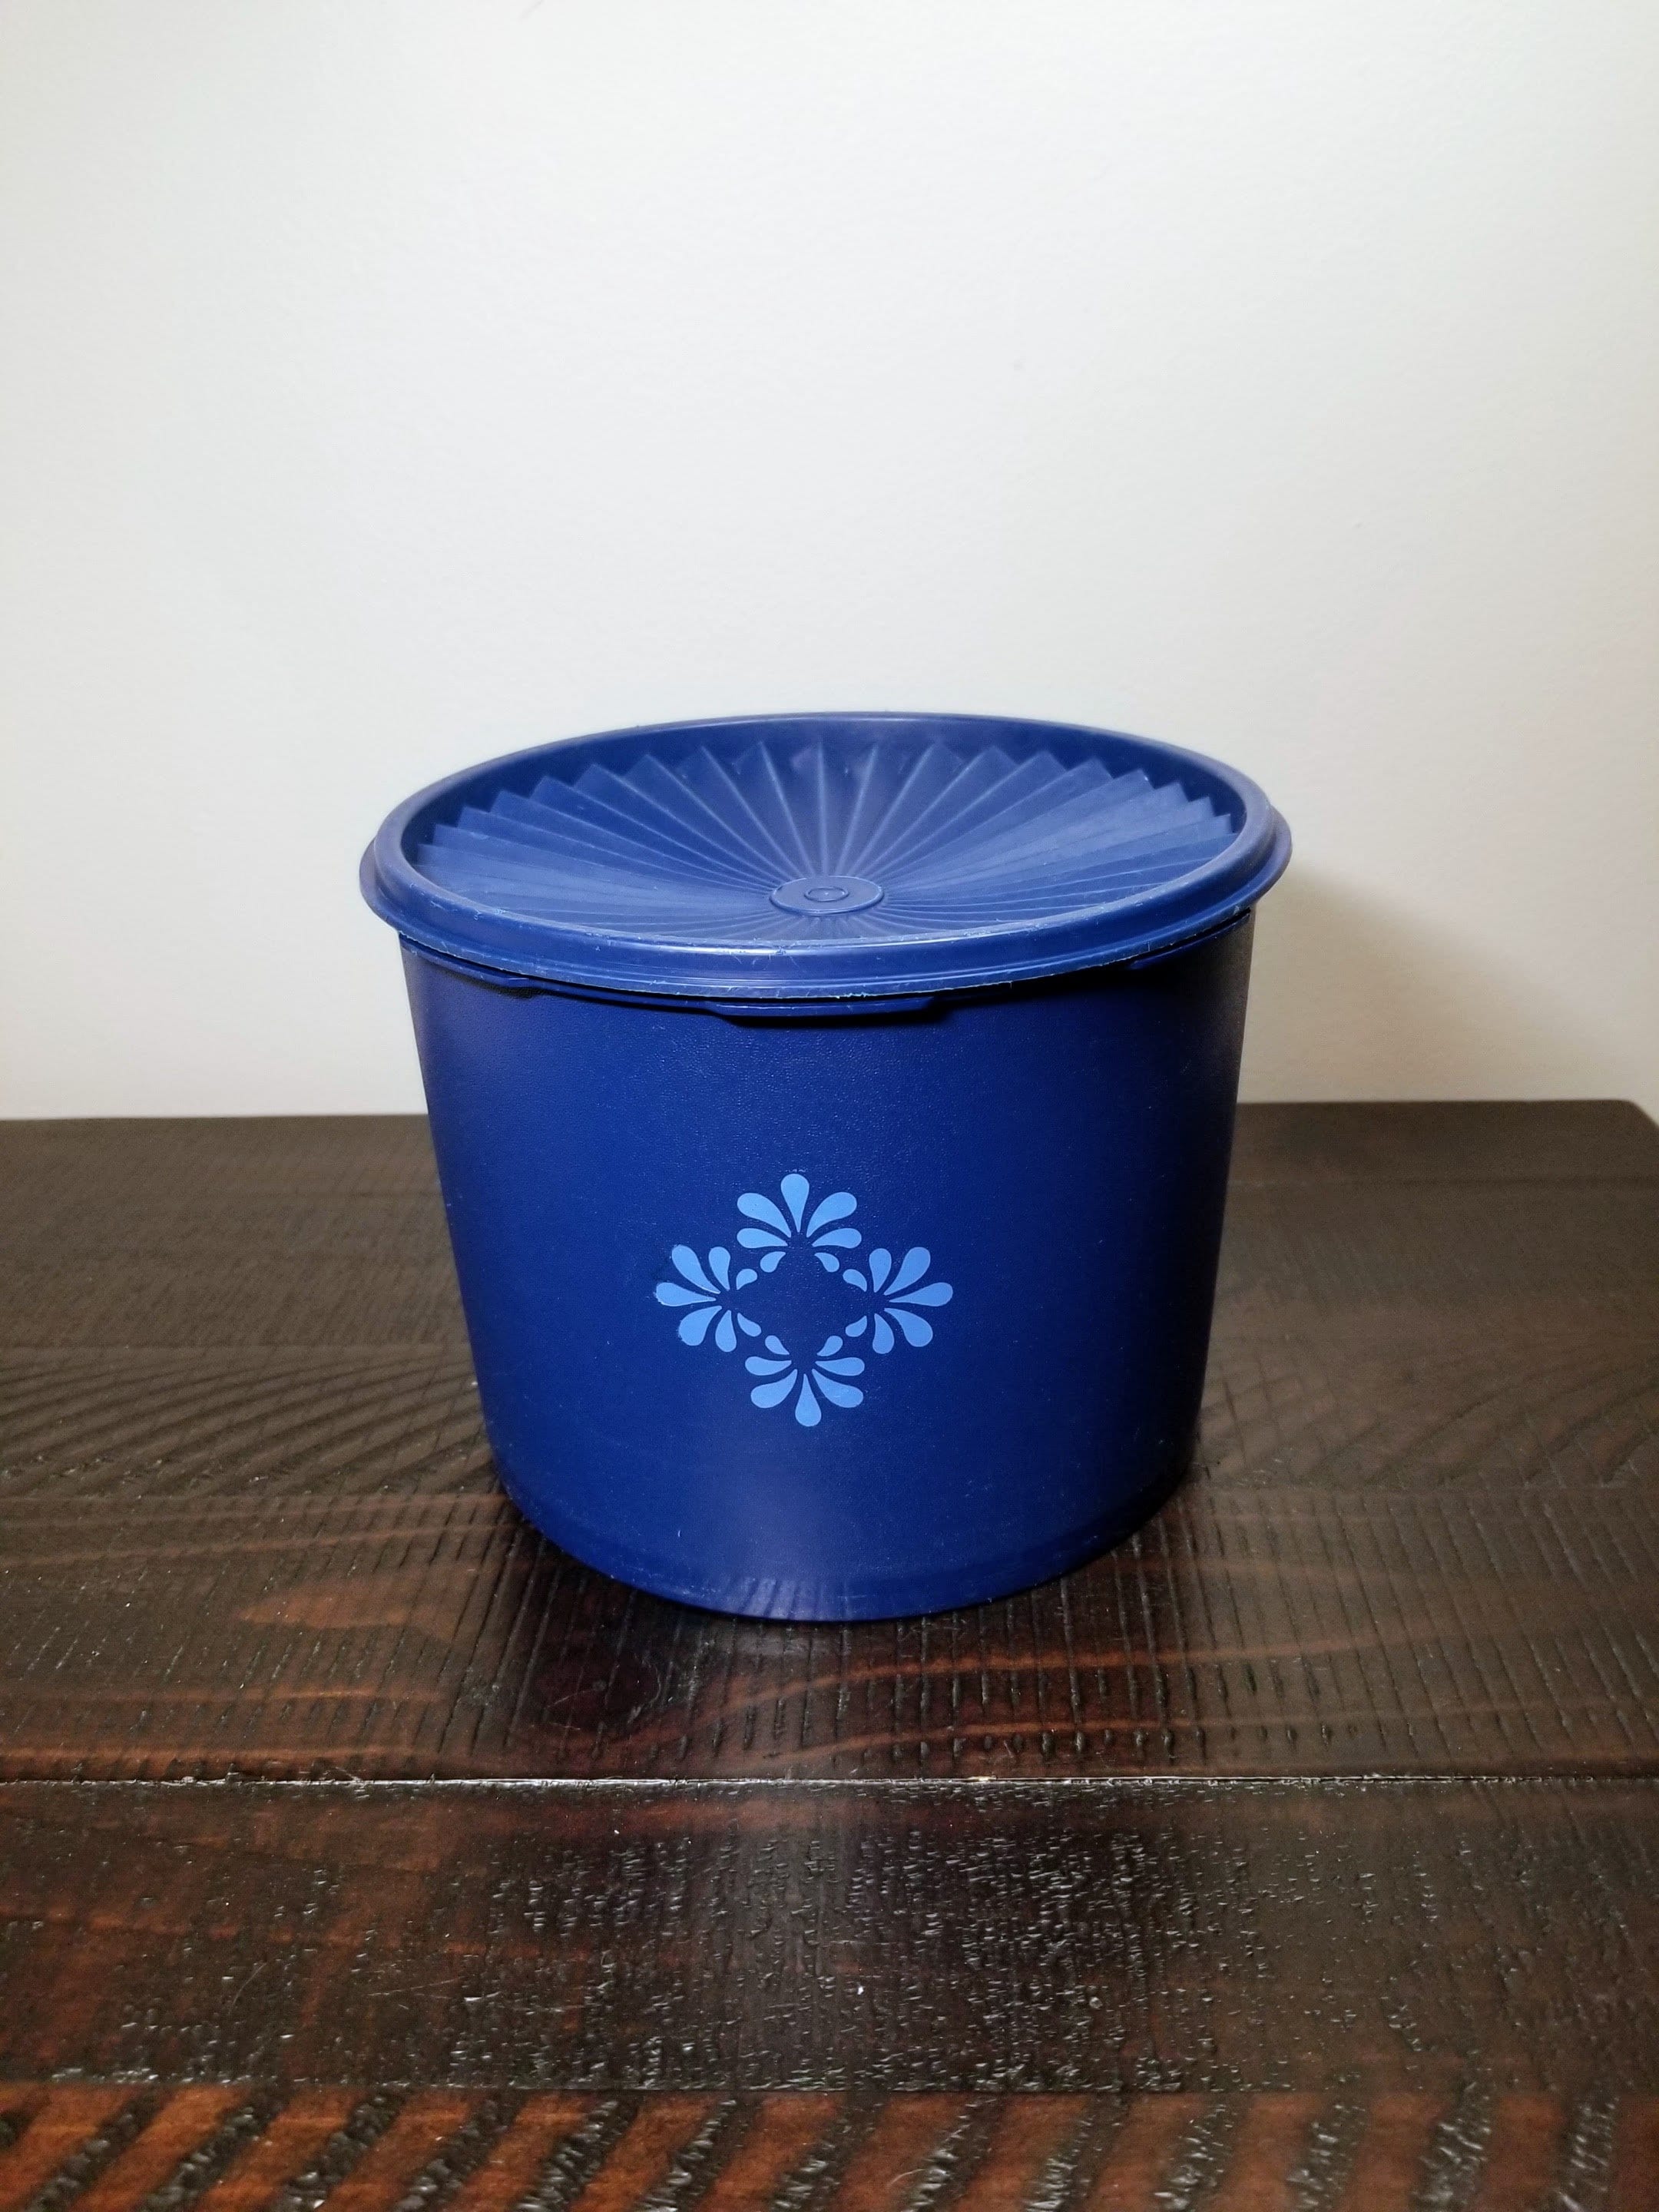 Tupperware Servalier One Touch Cookie Canister Spa Blue New